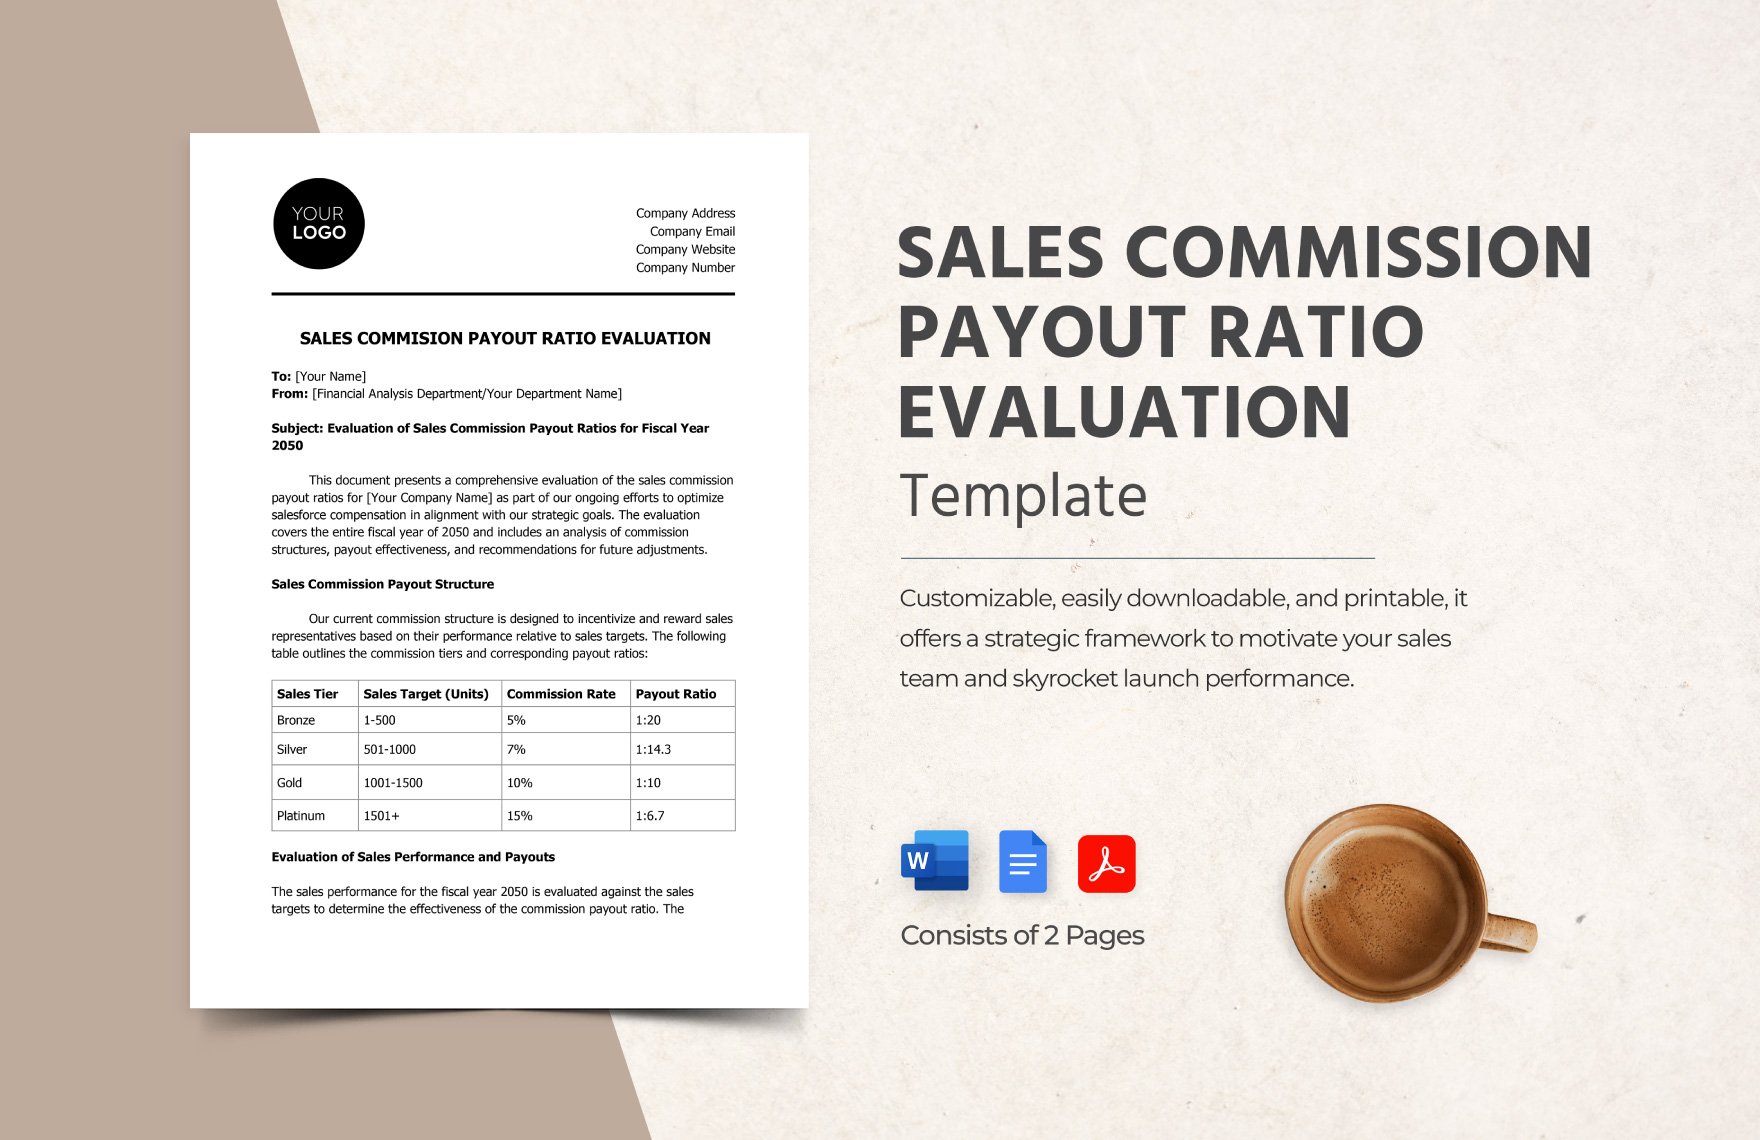 Sales Commission Payout Ratio Evaluation Template in Word, Google Docs, PDF